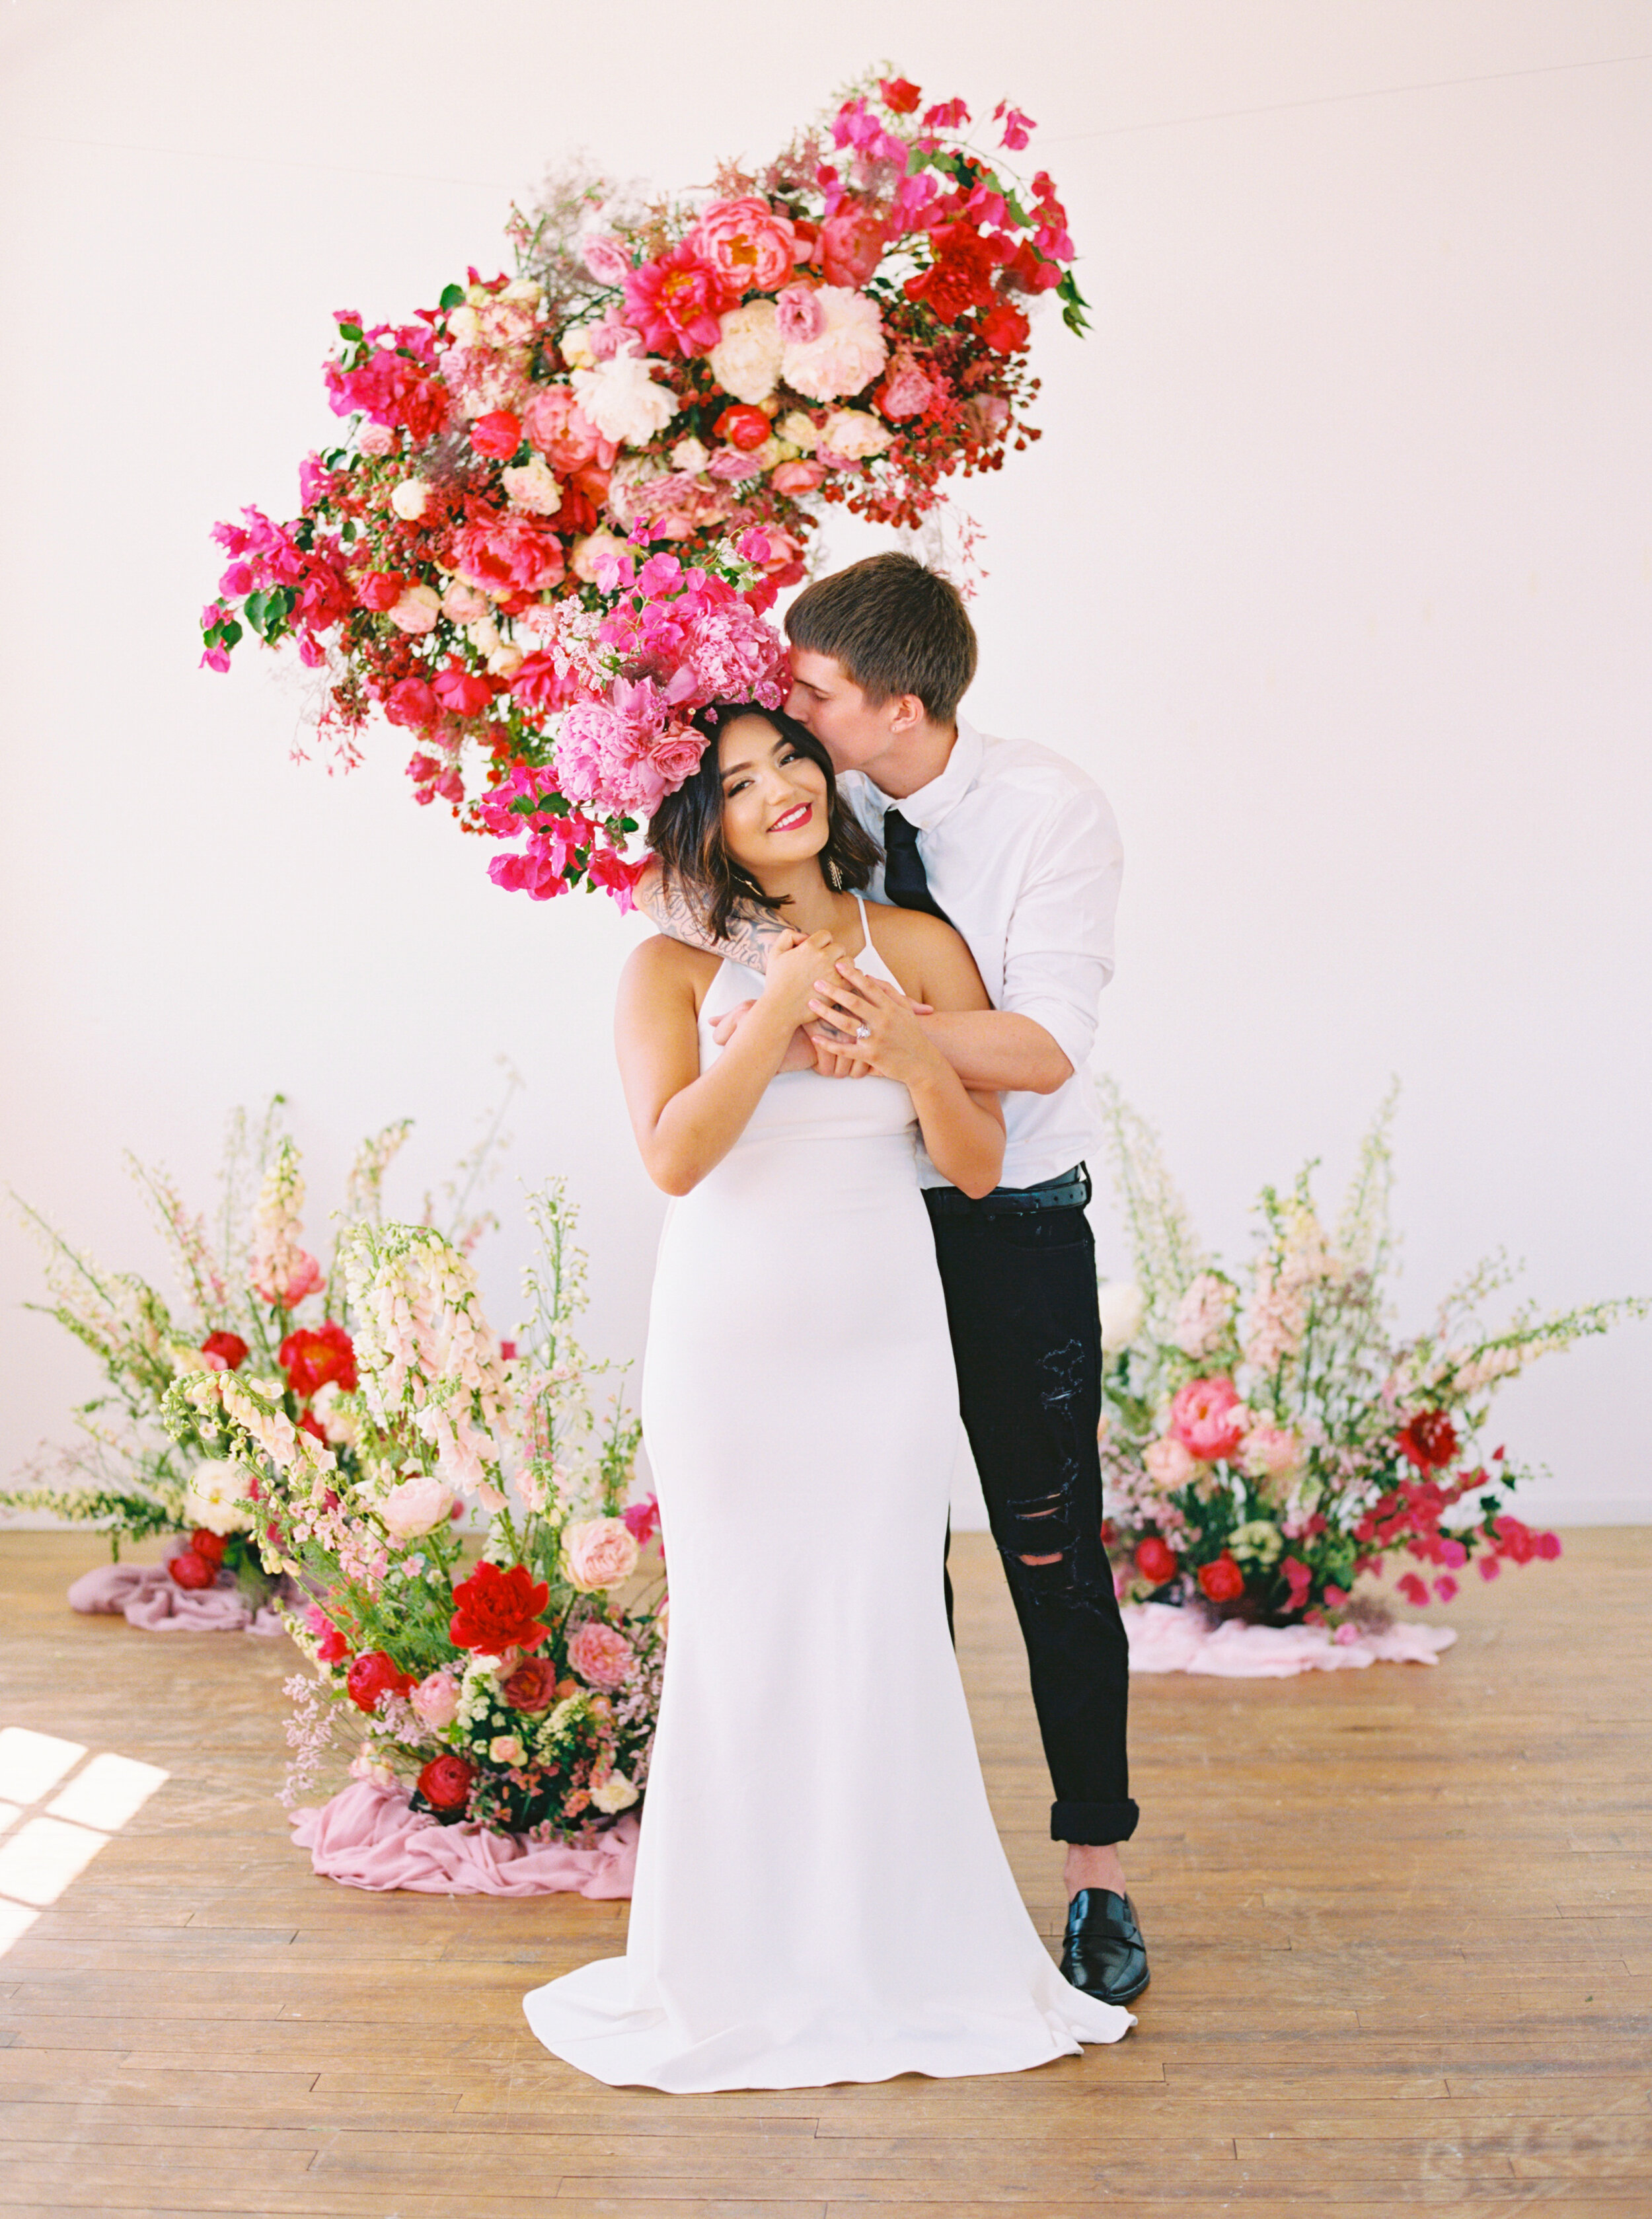 A Romantic Wedding Elopement Filled with Colorful Fuchsia - Sarahi Hadden Submission-33.jpg